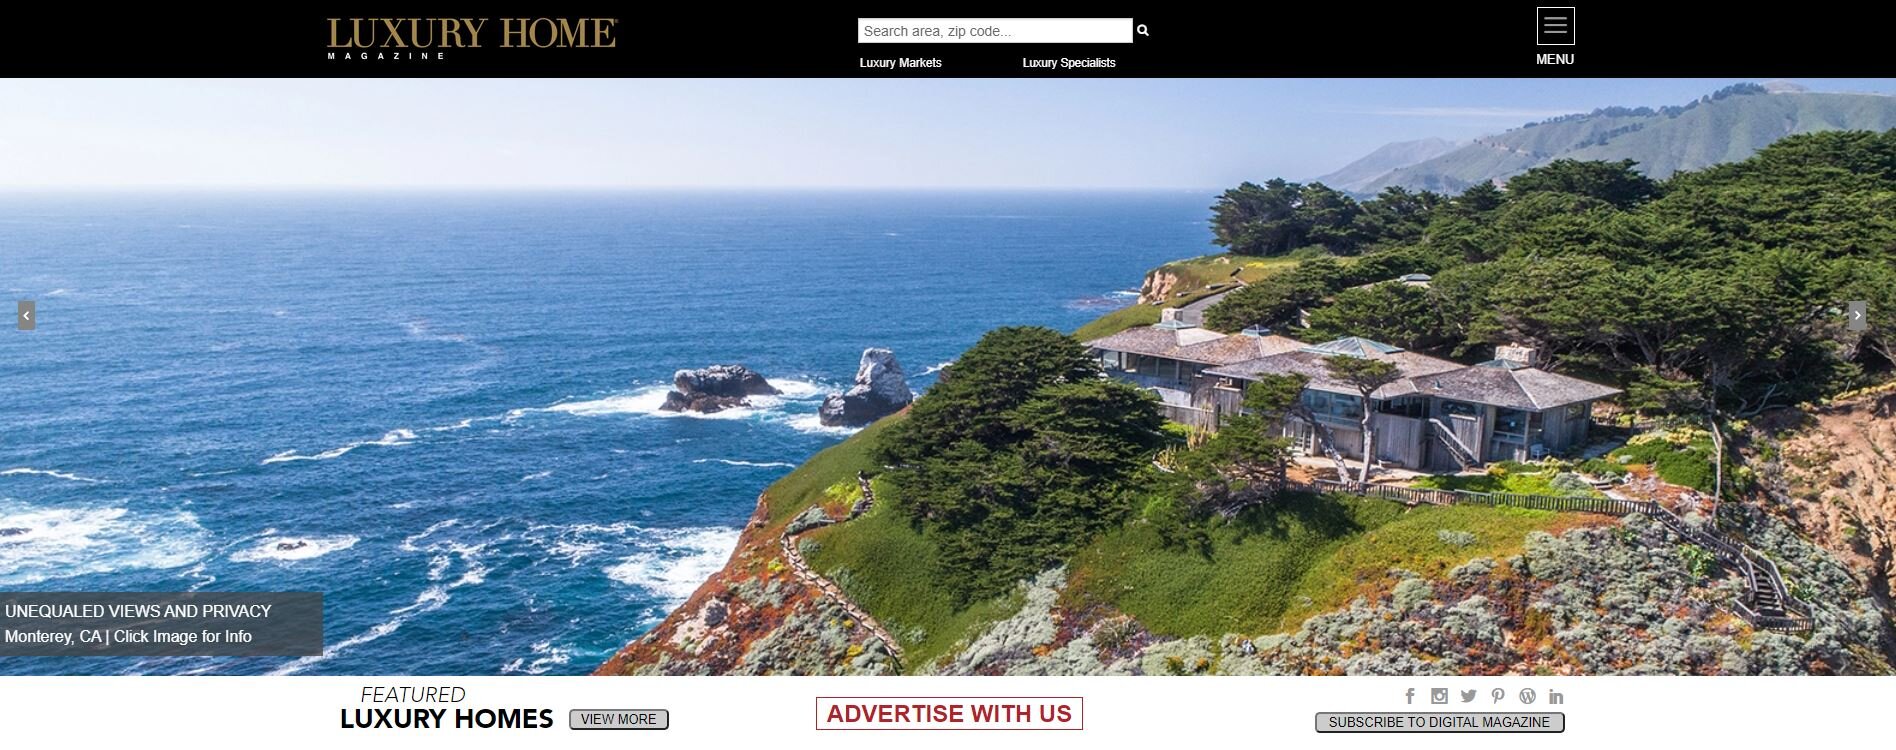 LuxuryHome Page banner.JPG